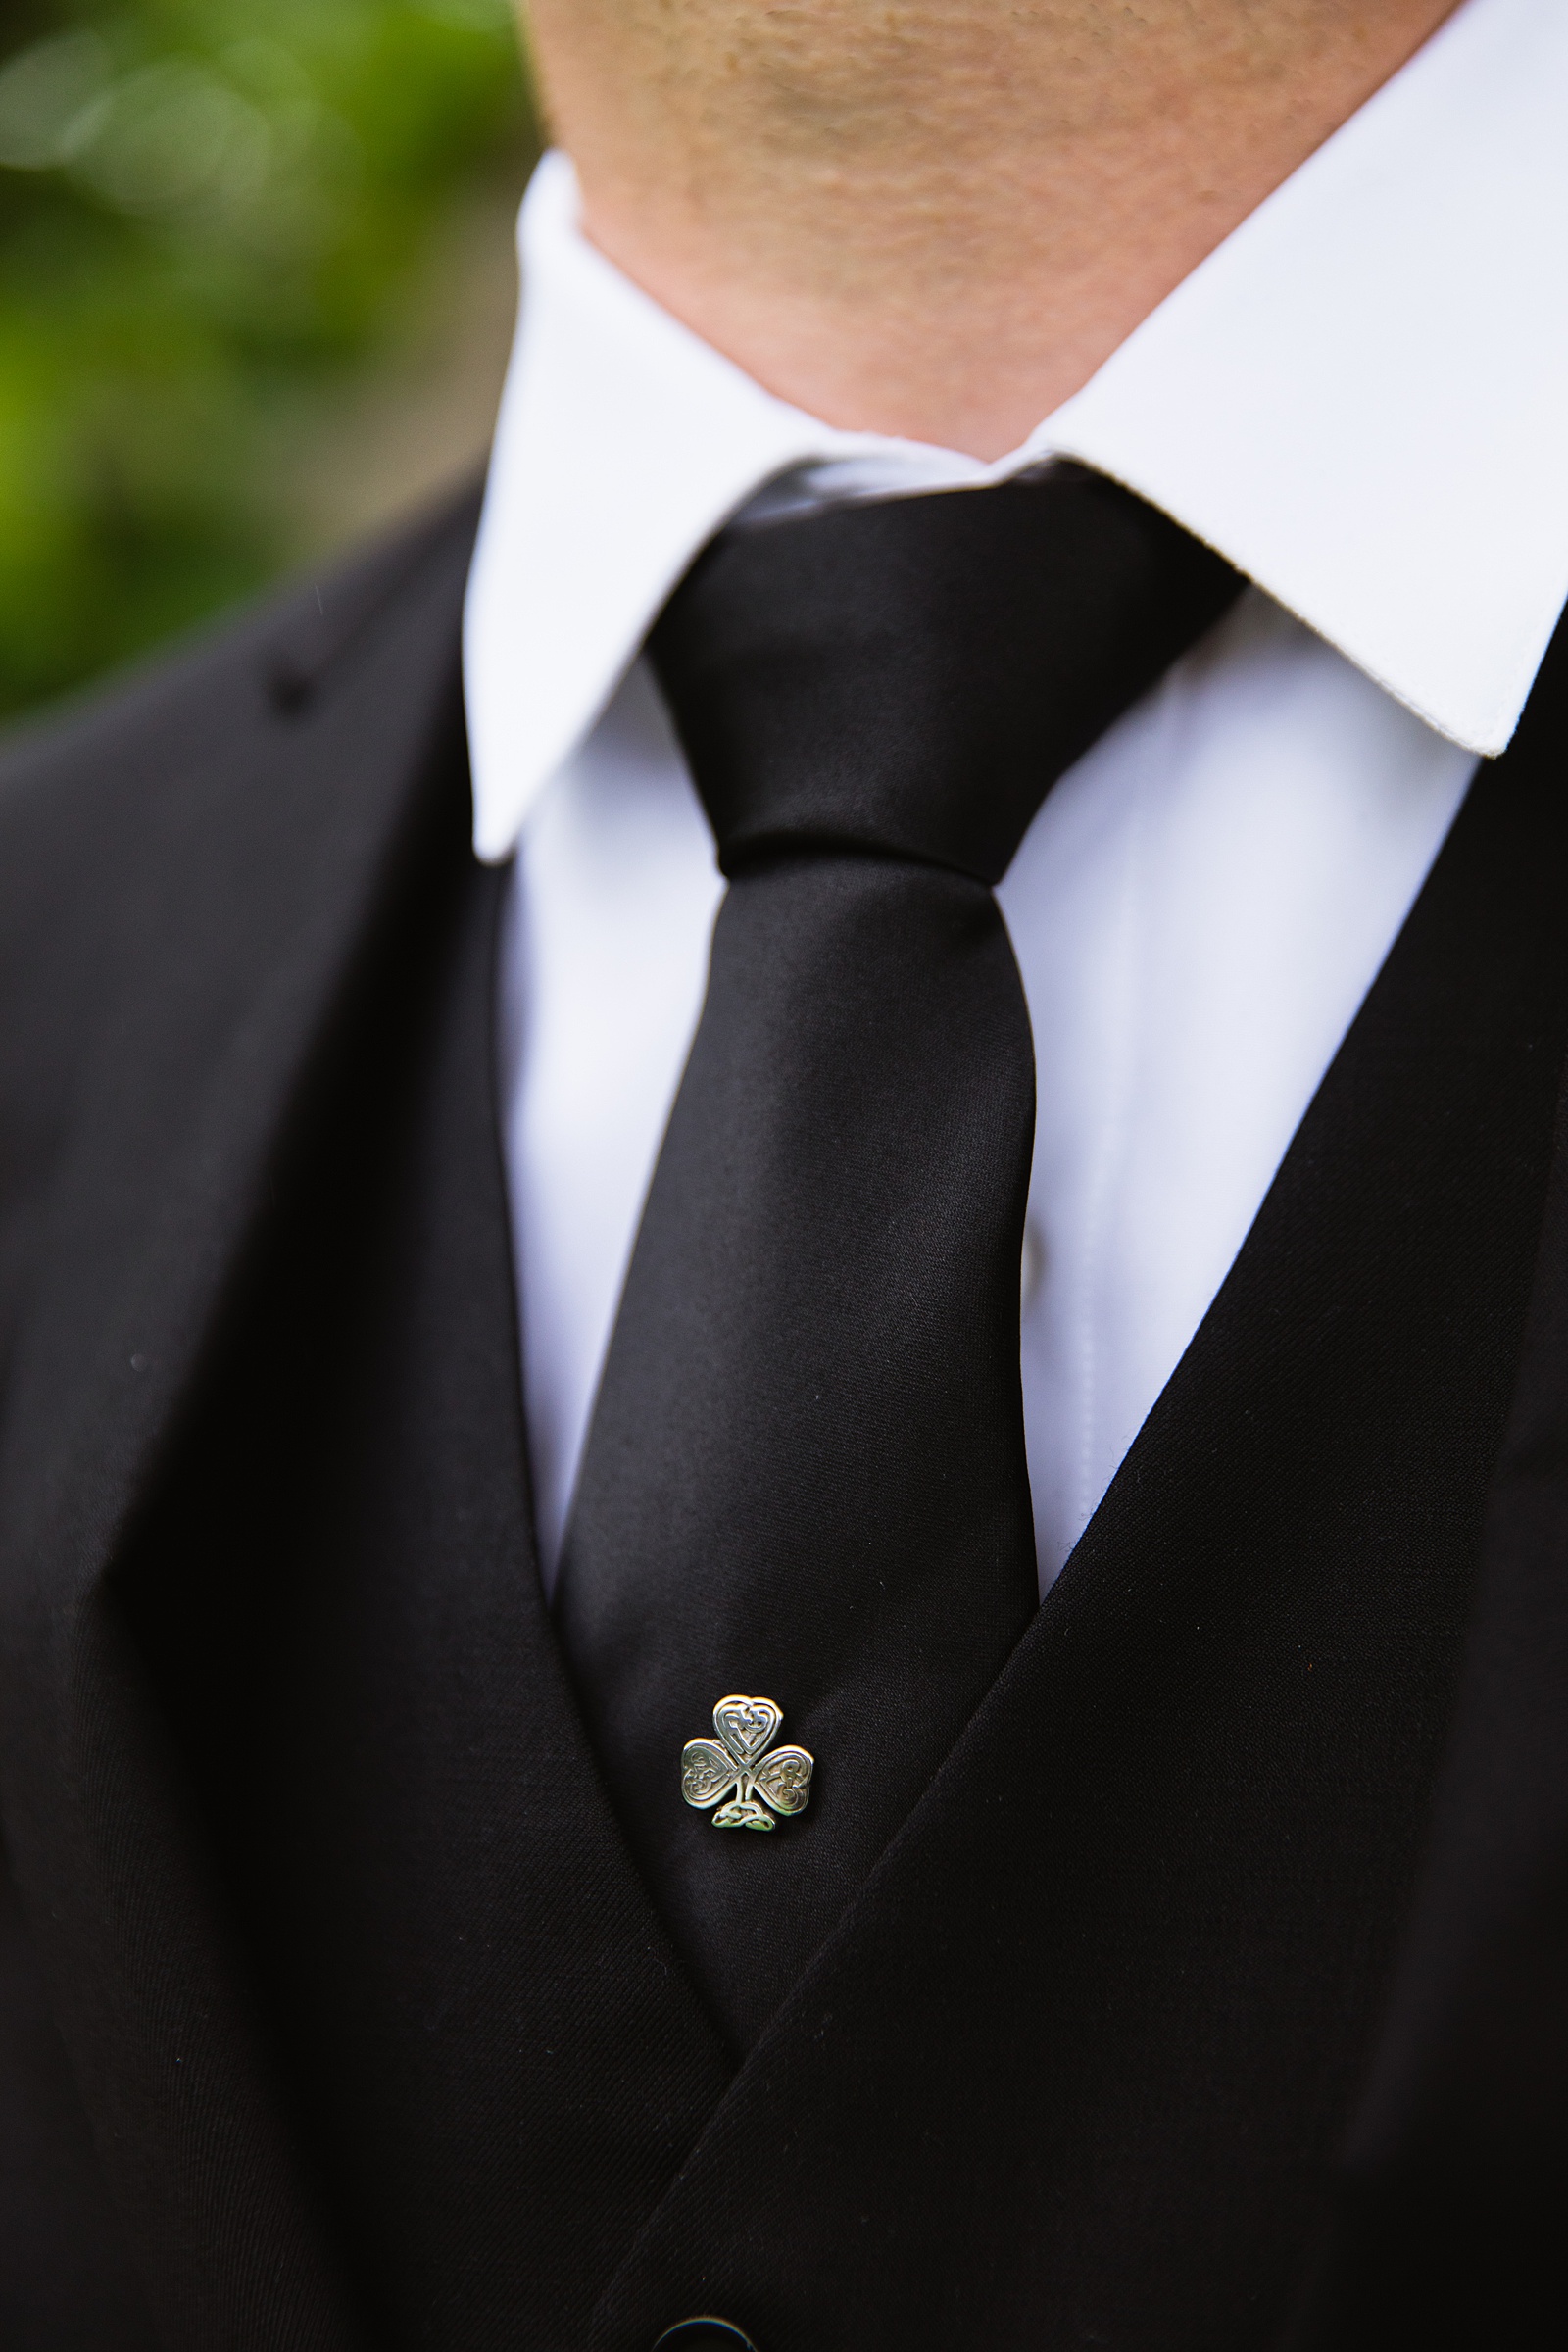 Groom's wedding day details of 3 leaf clover Irish tie pin by PMA Photography.